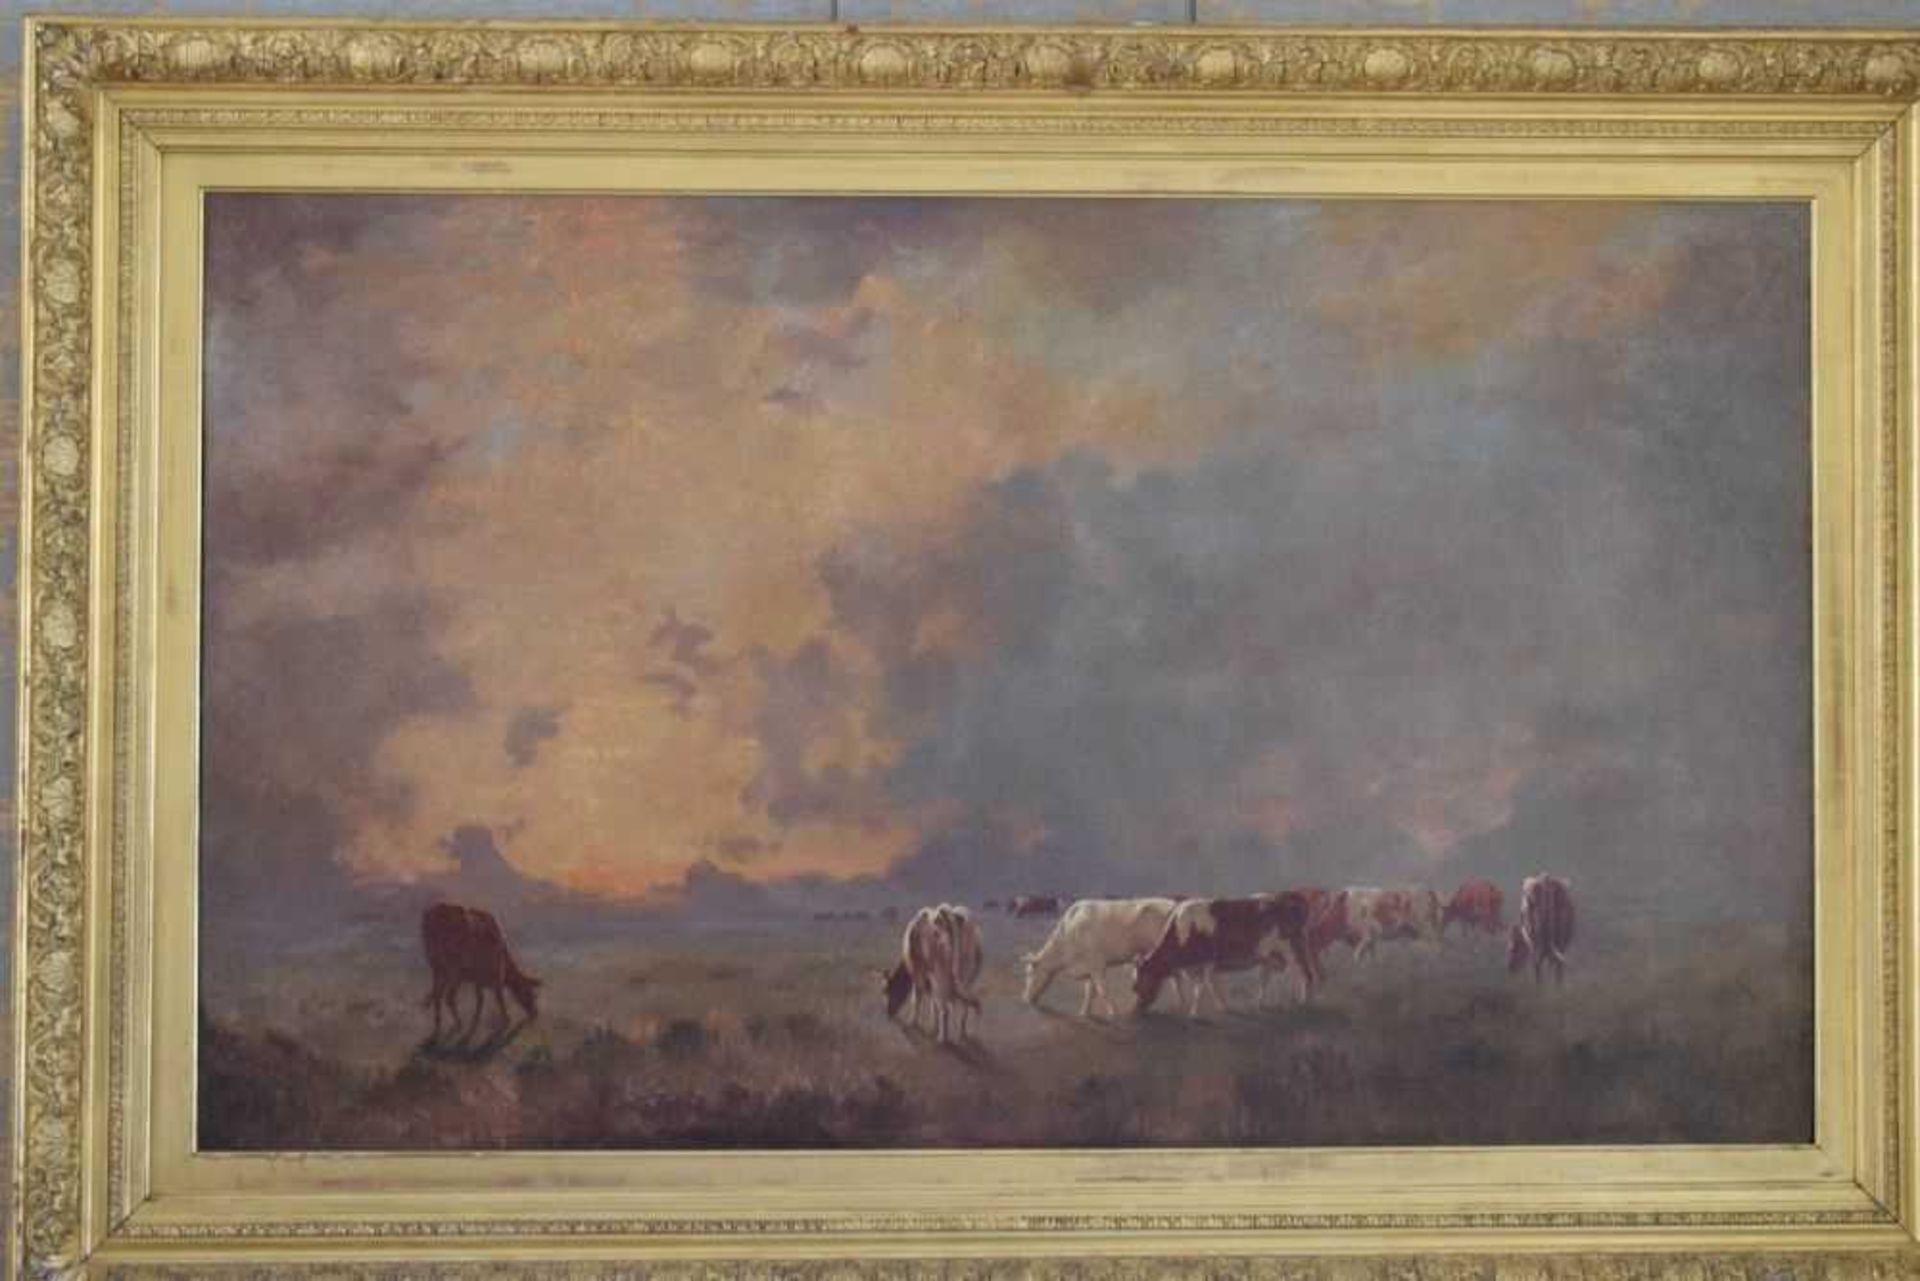 Manner of William Frederick Hulk, (1852-1906) - Oil on canvas - Cattle grazing - Image 7 of 10